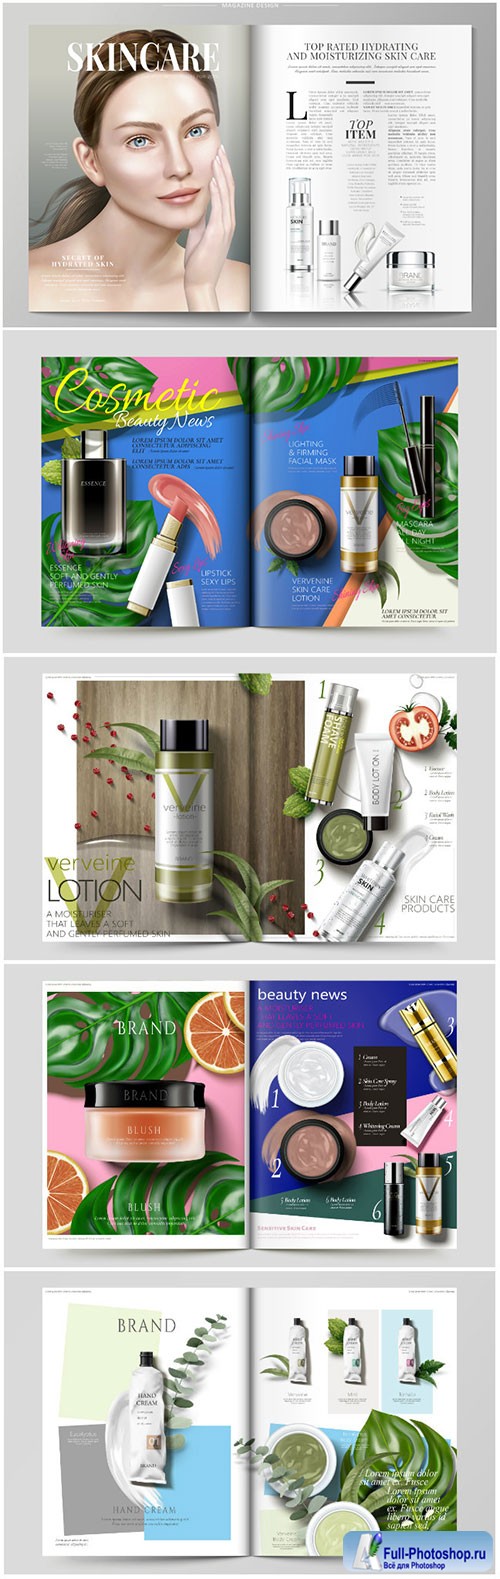 Cosmetic magazine vector template, attractive model with product containers in 3d illustration # 4